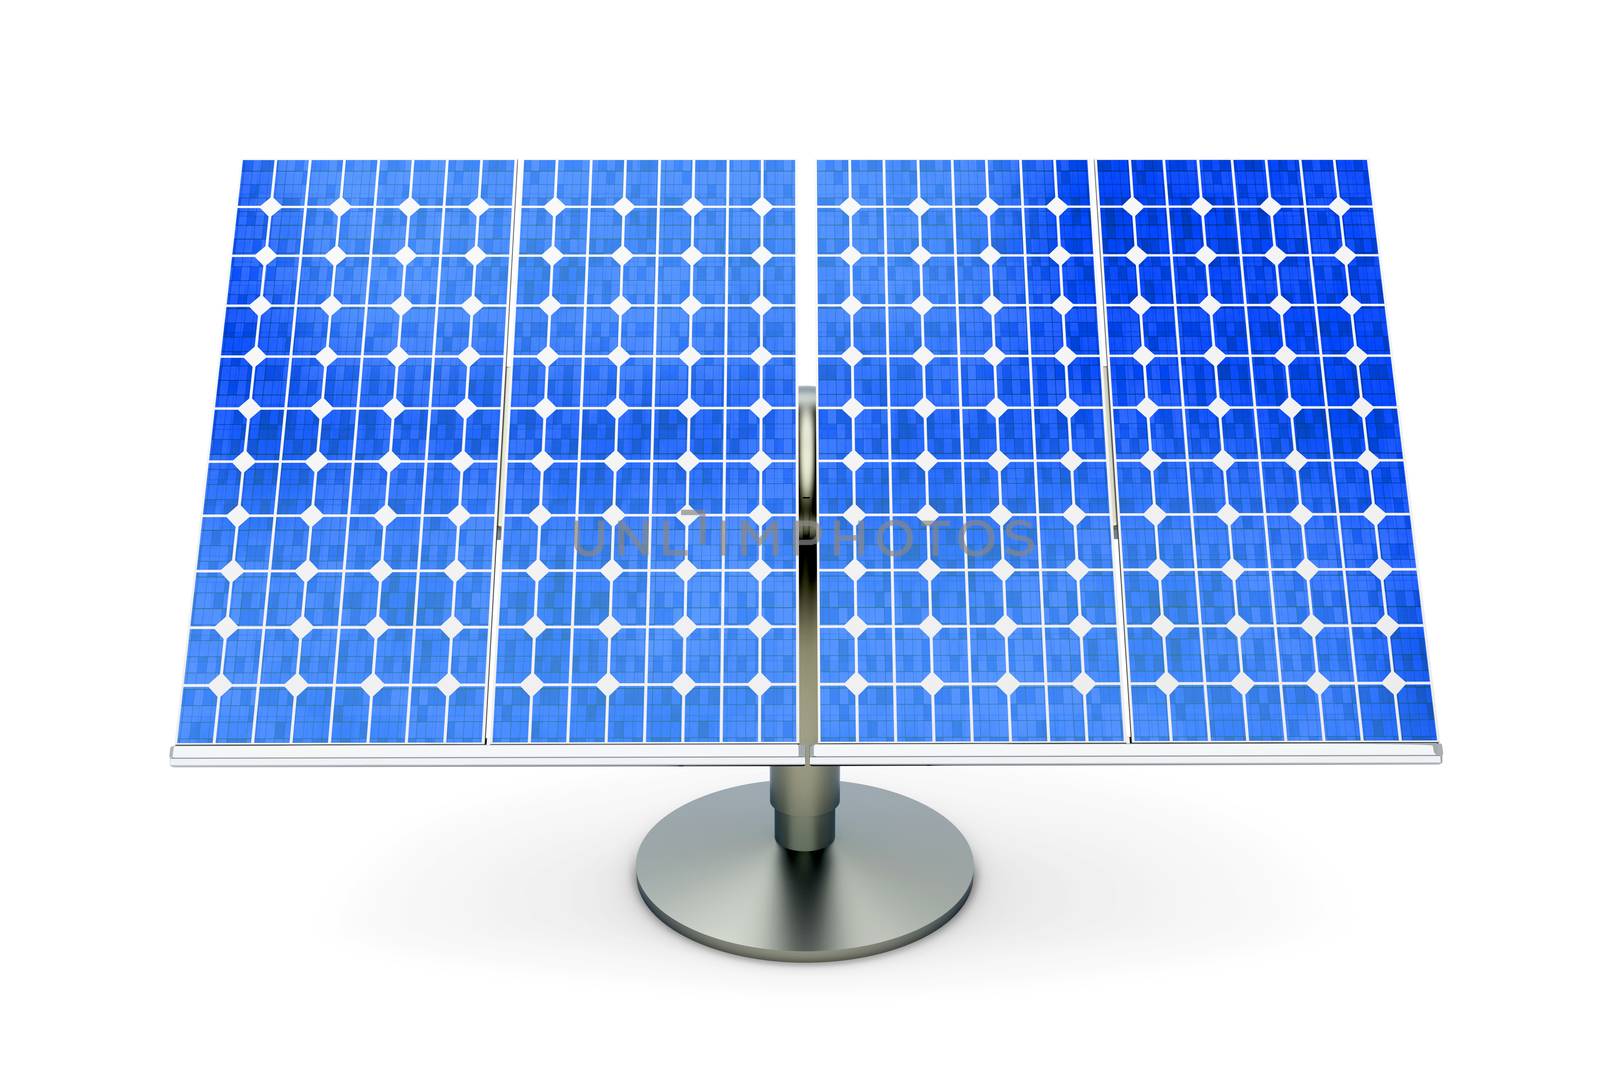 3D rendered Illustration. A single solar panel, isolated on white.